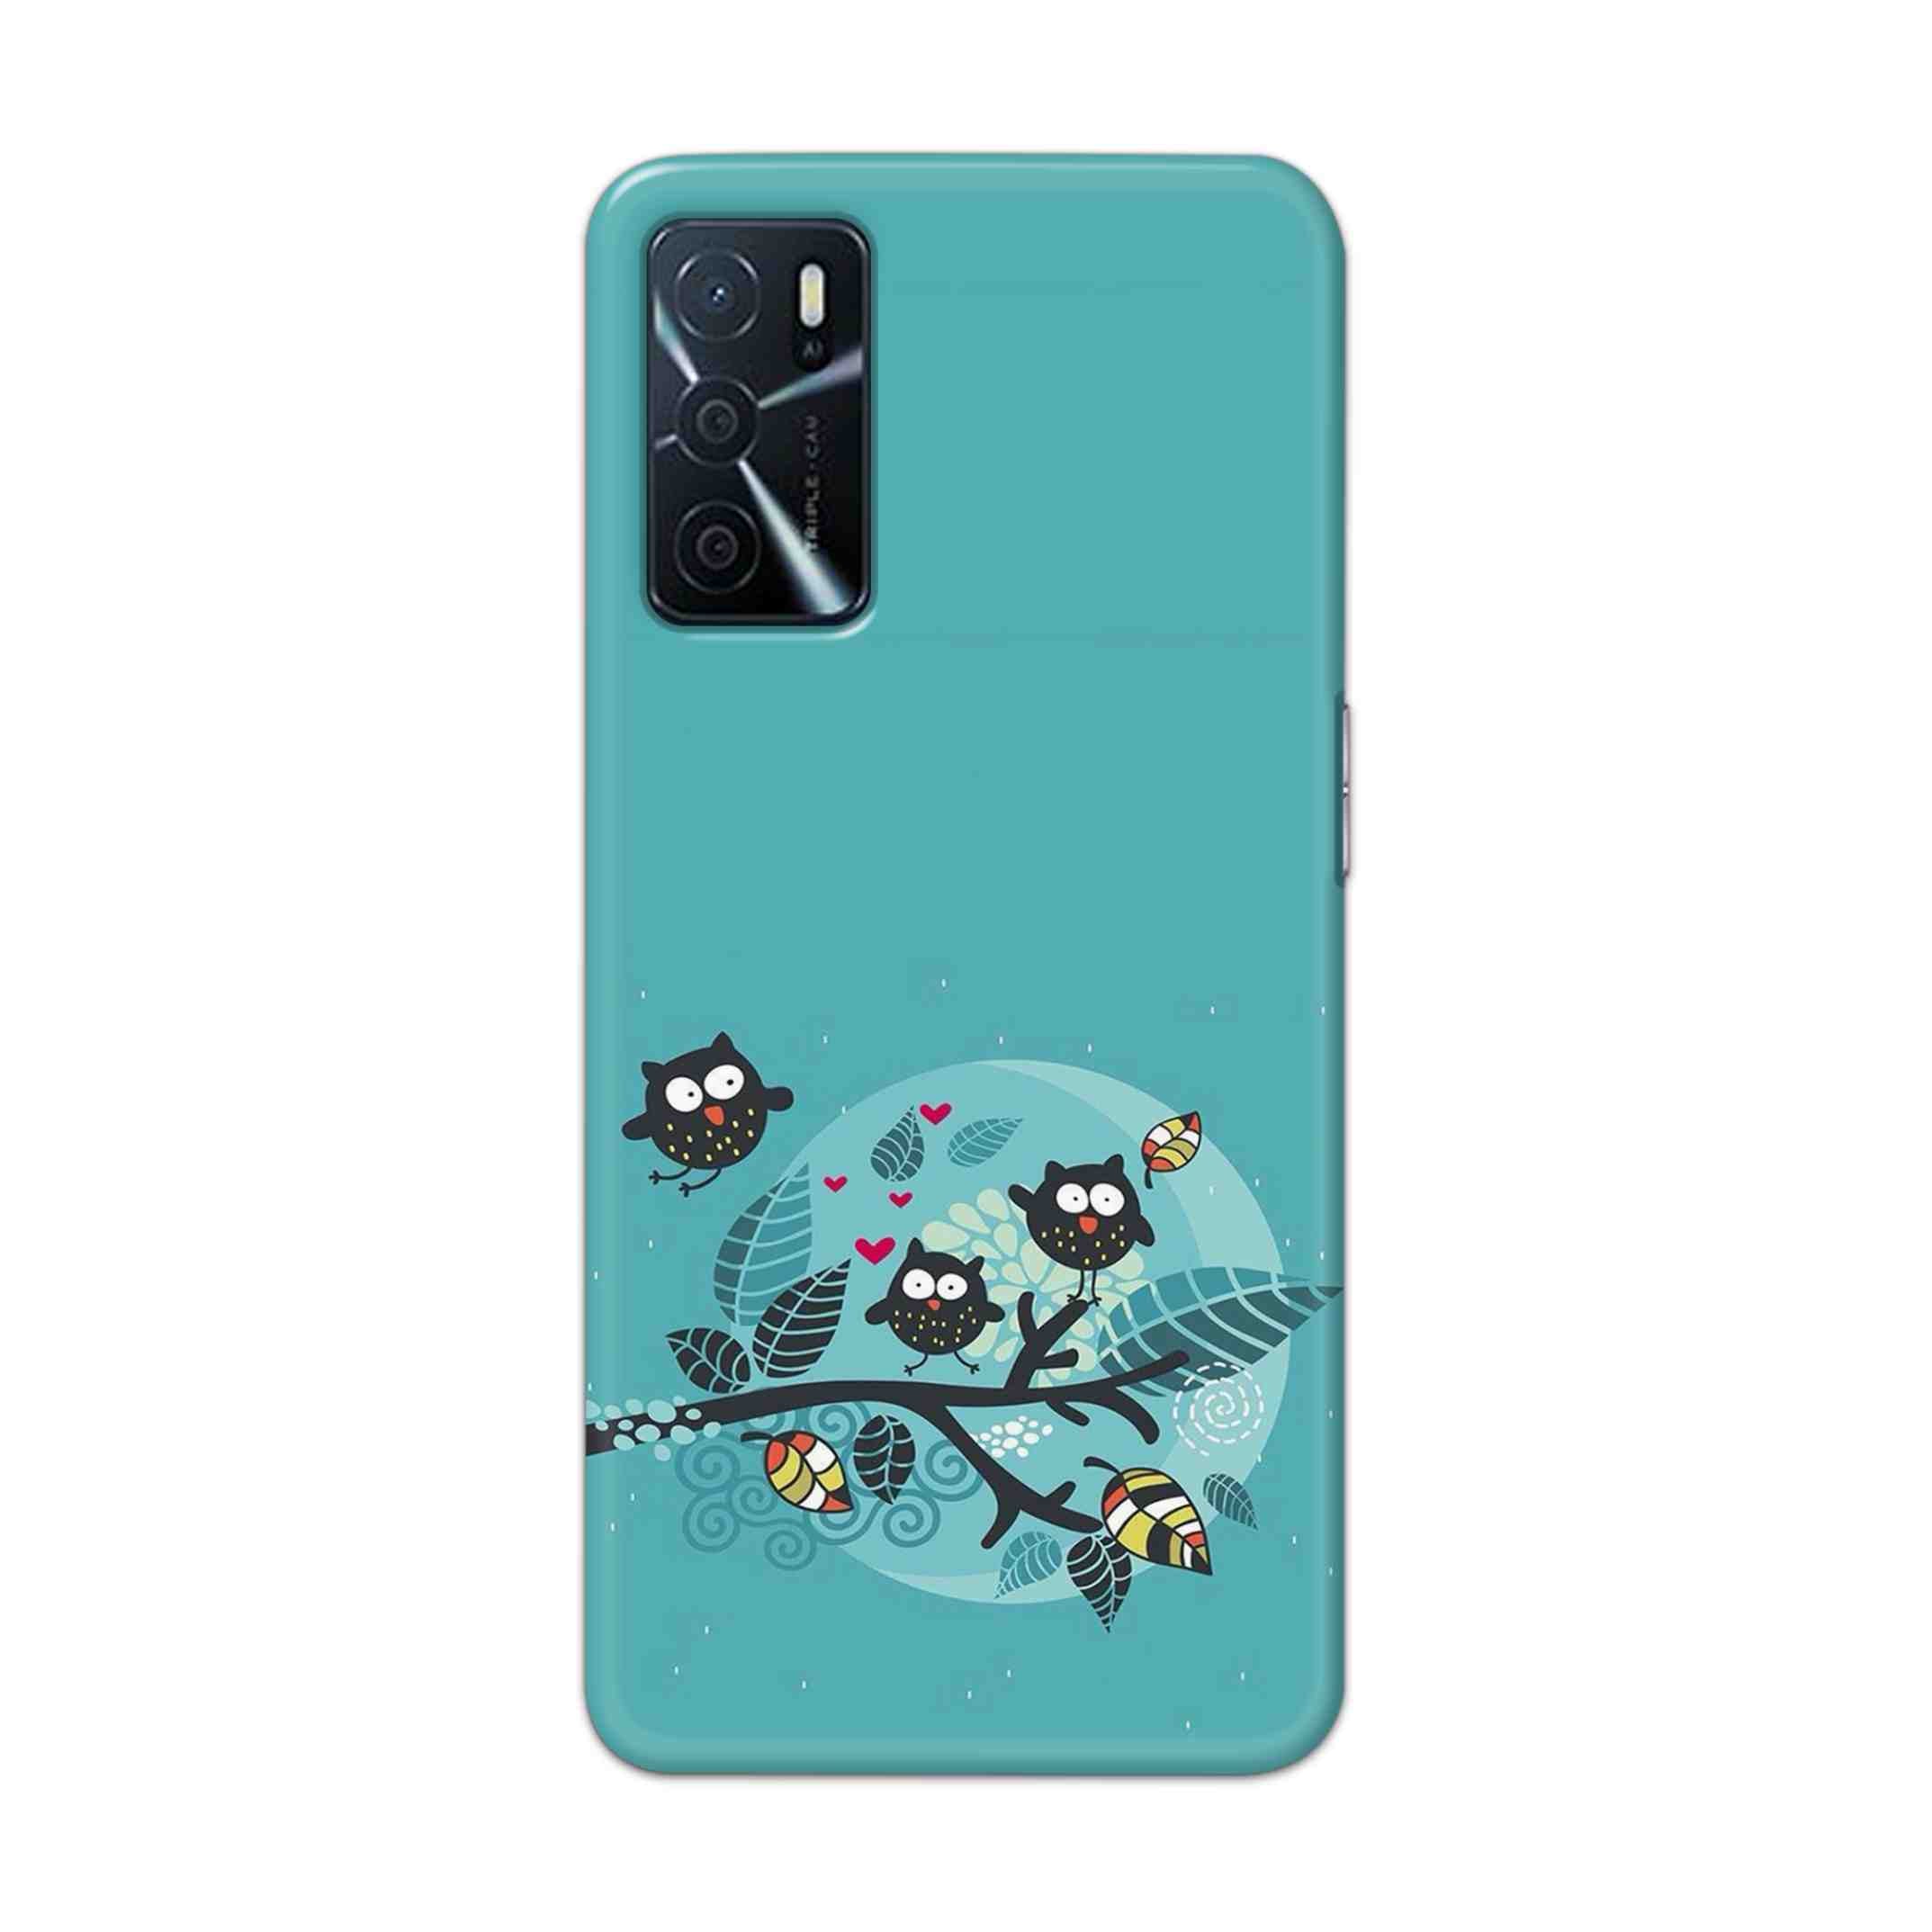 Buy Owl Hard Back Mobile Phone Case Cover For Oppo A16 Online